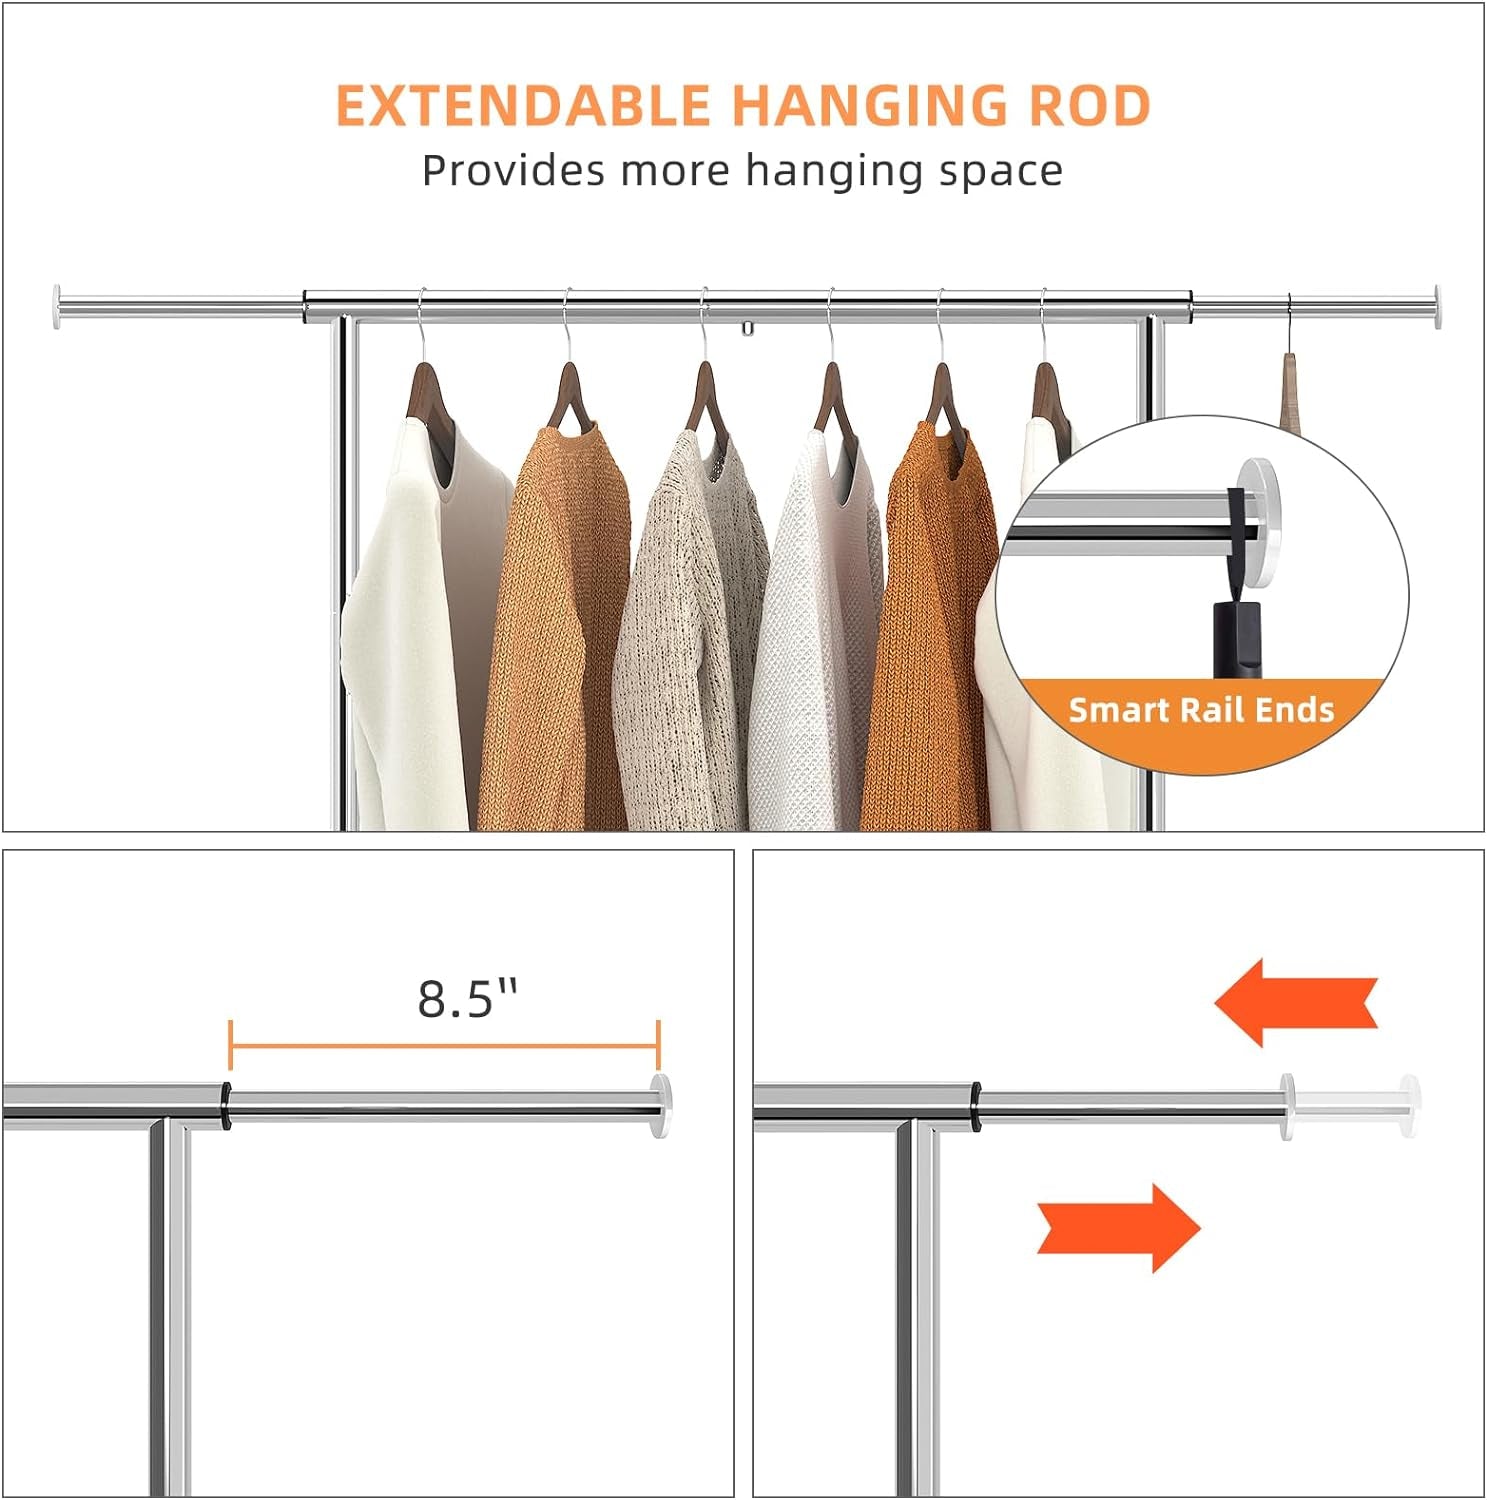 Standard Clothing Garment Rack, Rolling Clothes Organizer with Wheels and Bottom Shelves, Extendable, Chrome